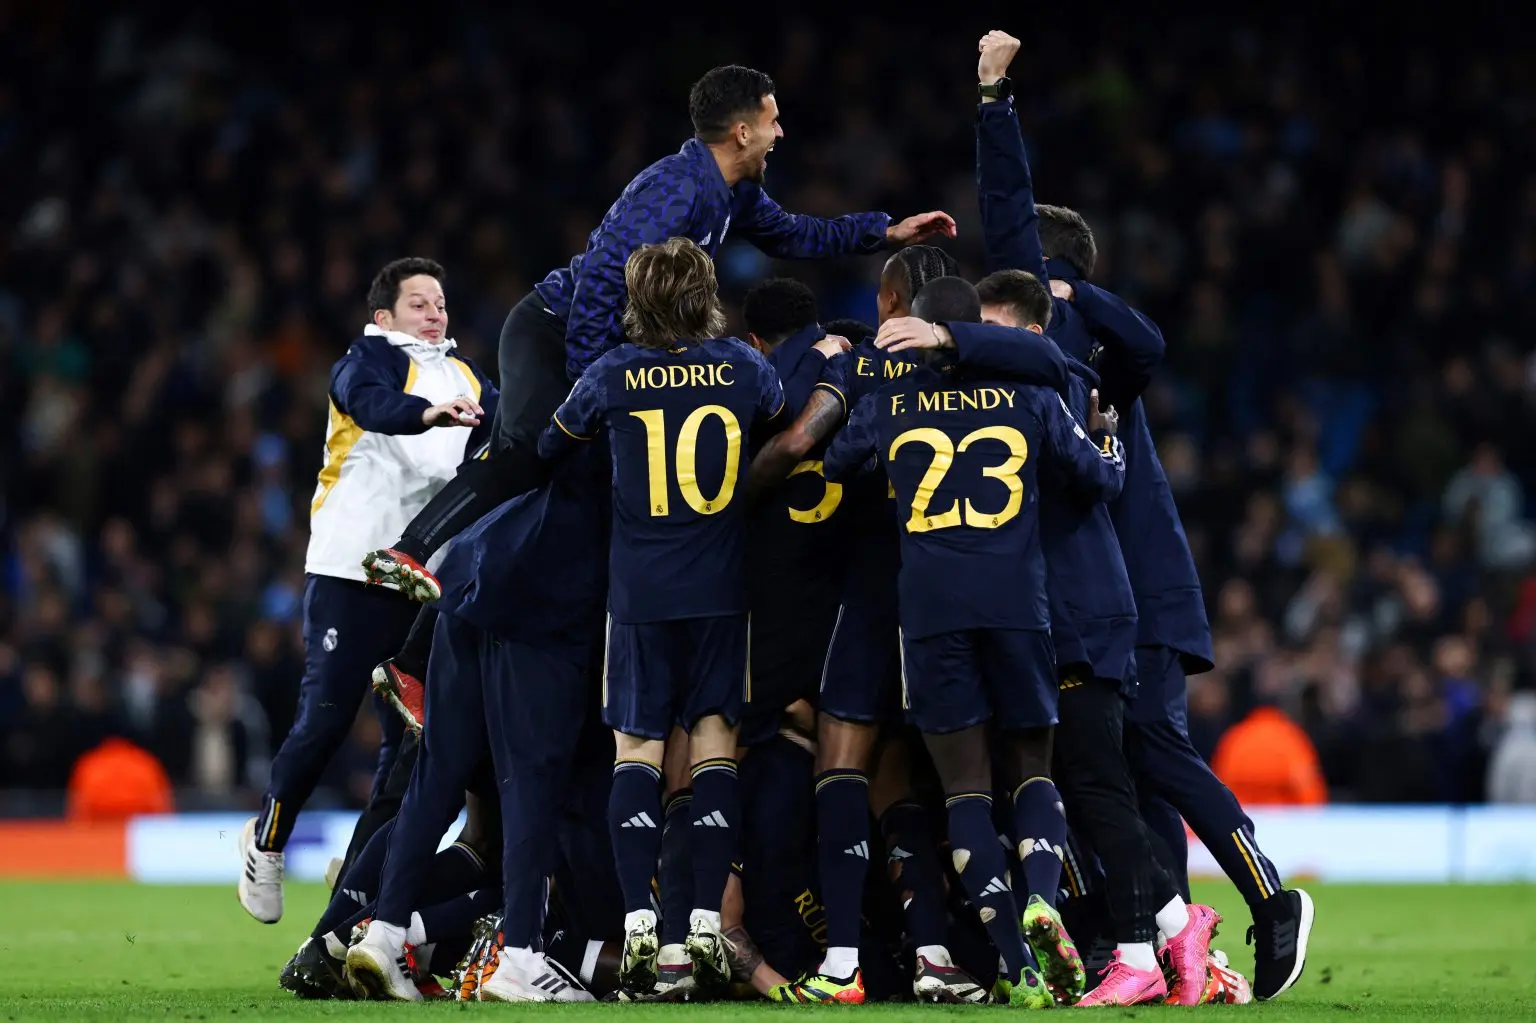 Real Madrid exacted revenge on Man City to reach the Champions League semi-finals 4-3 on penalties after withstanding